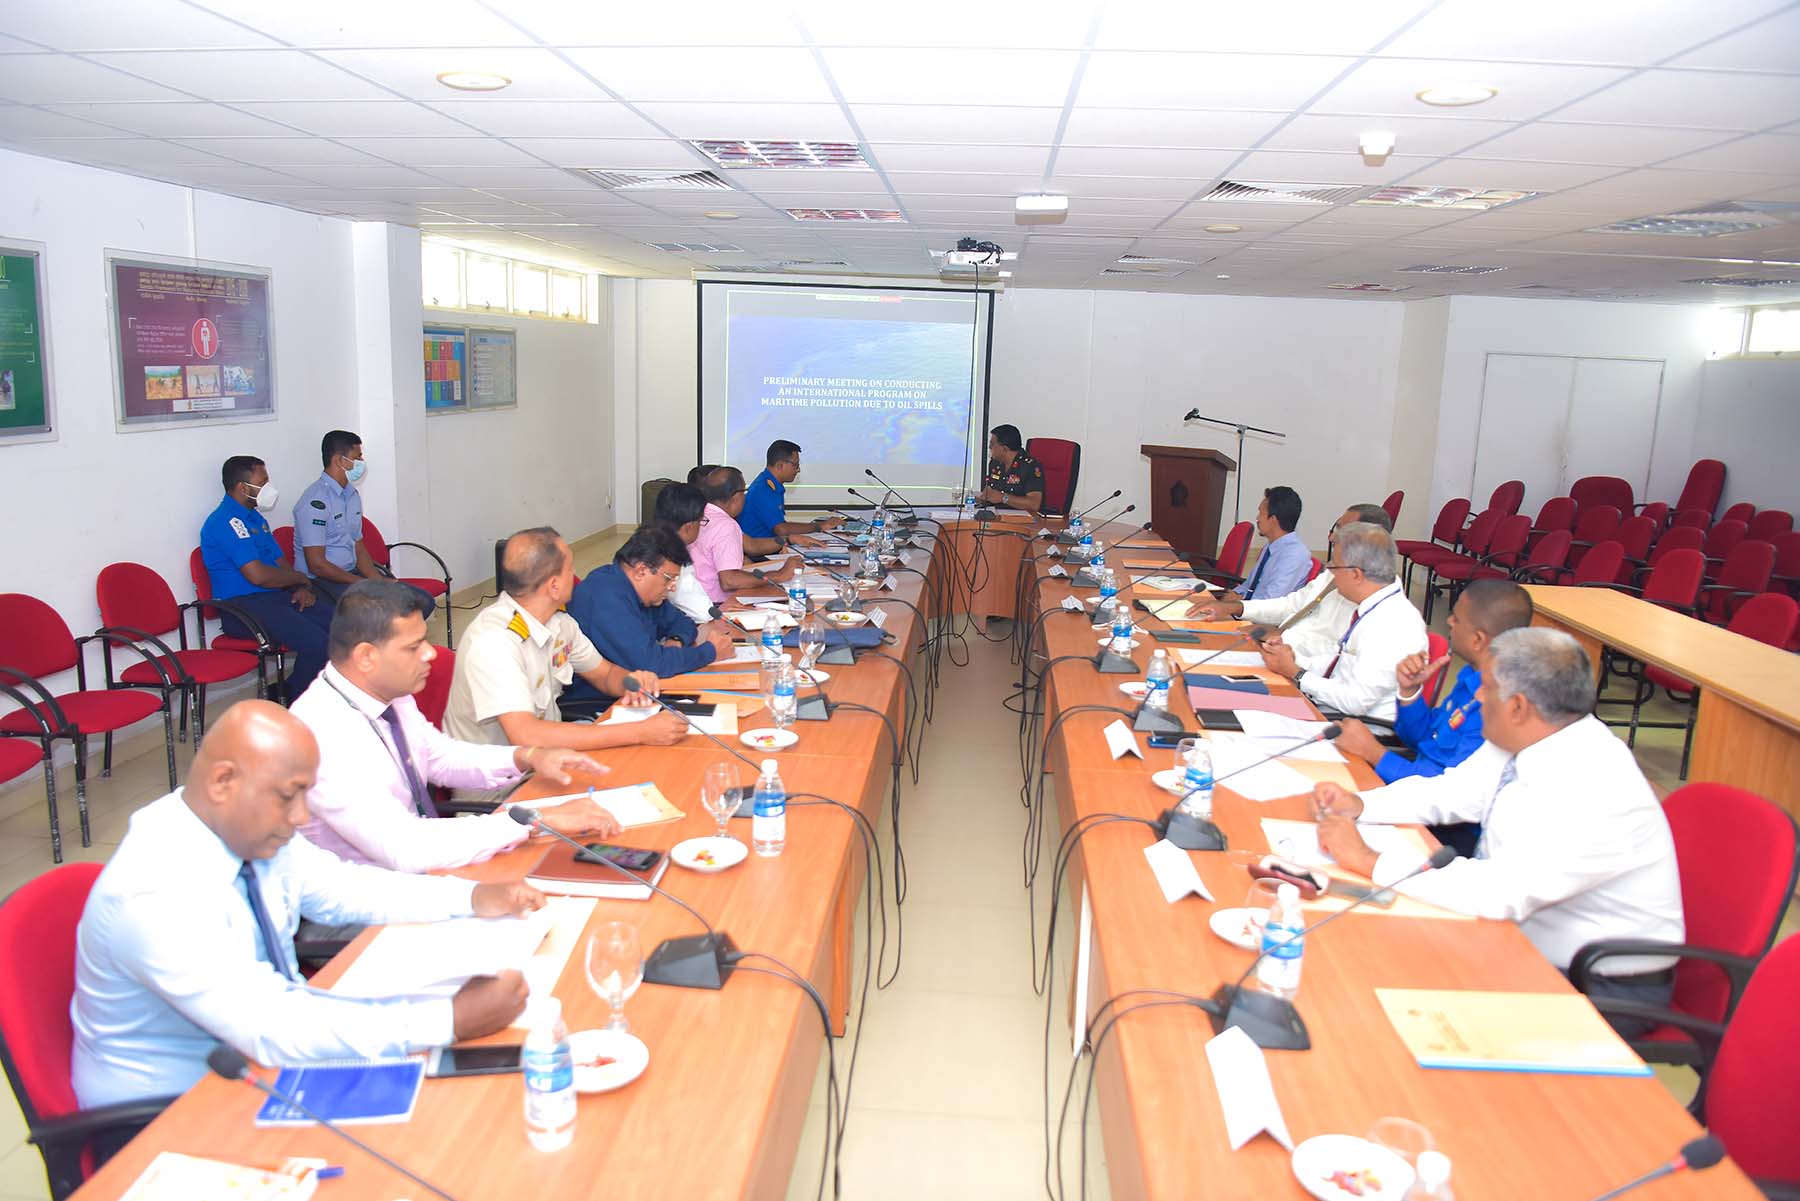 Meeting on Conducting Program Related to Humanitarian Assistance and Disaster Relief HADR 2